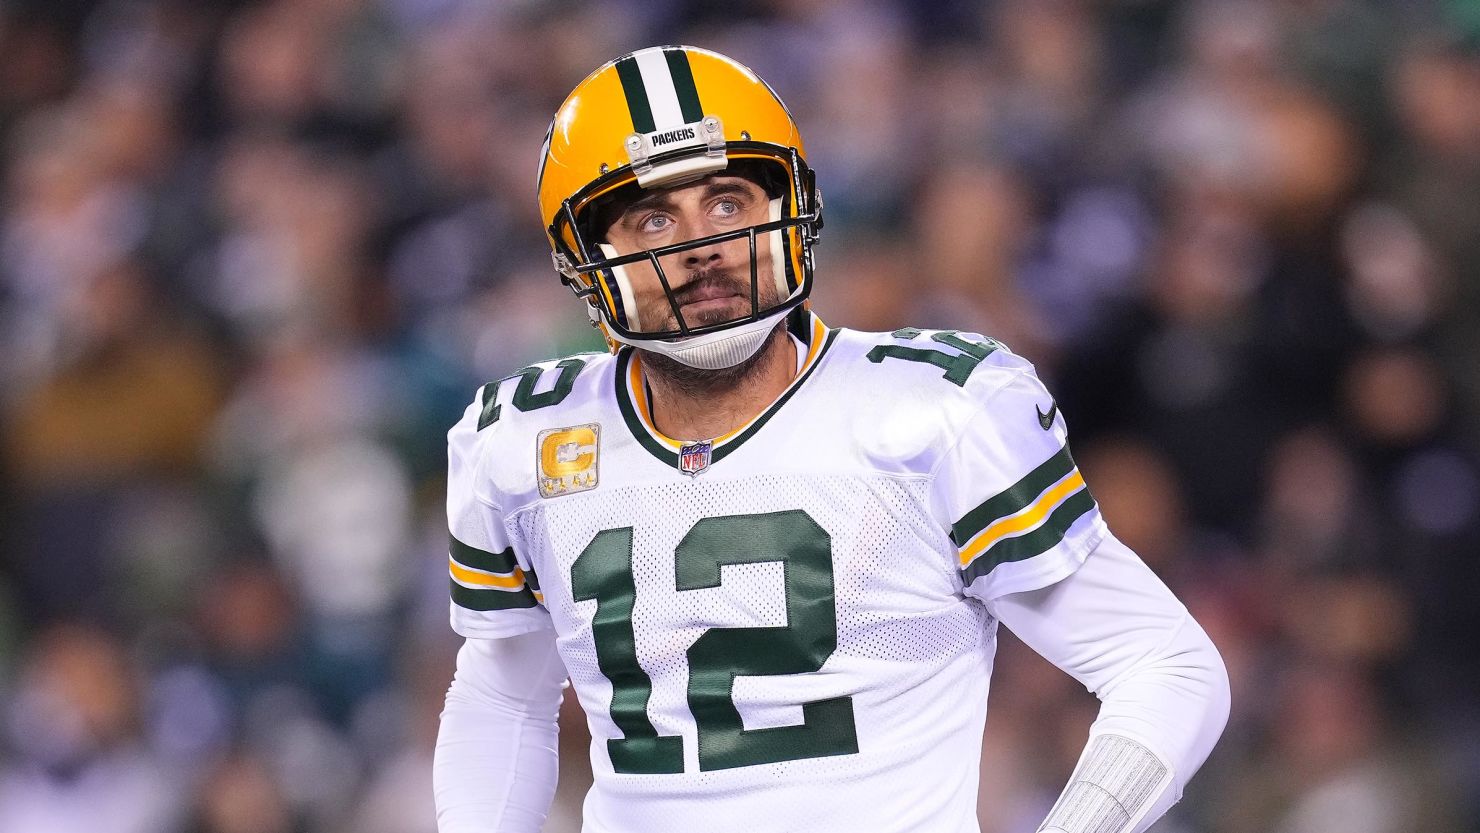 Aaron Rodgers: Green Bay Packers quarterback intends to play for the New York Jets | CNN